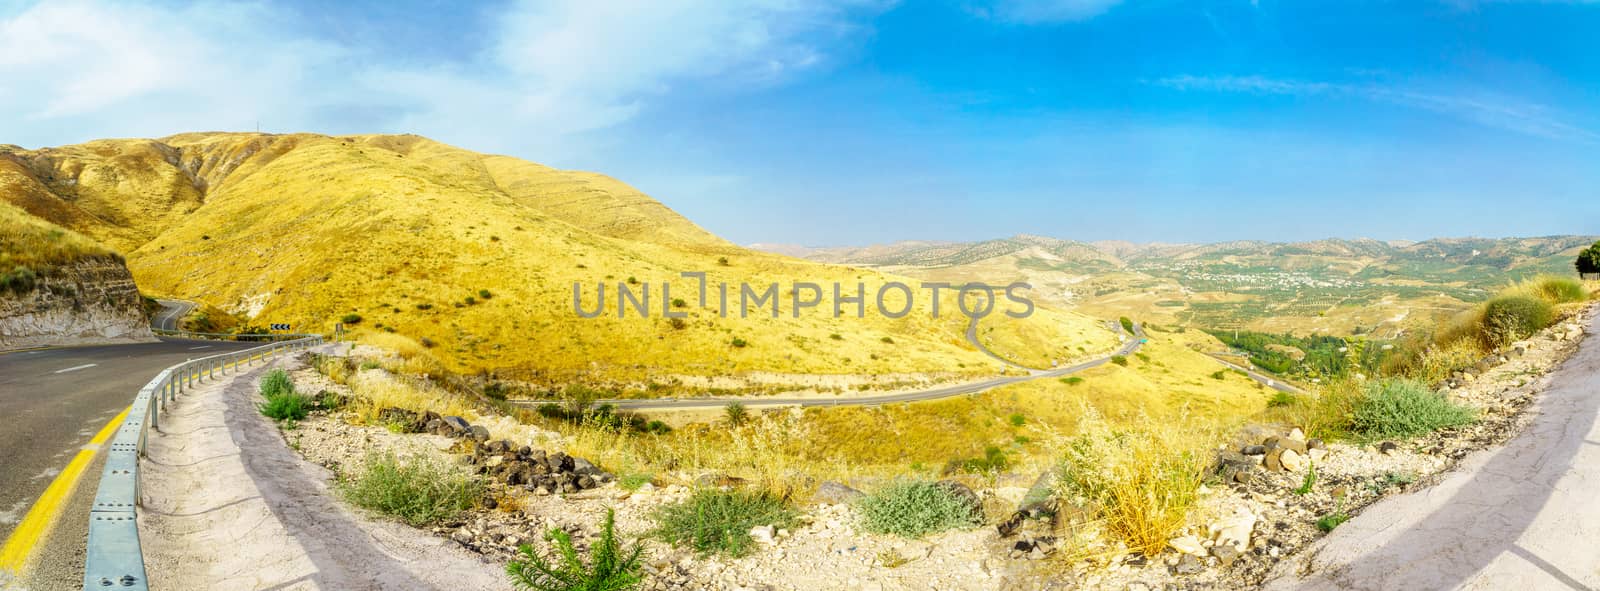 Panoramic landscape of the Golan Heights, winding road 98, and the Yarmouk River valley, near the border between Israel and Jordan